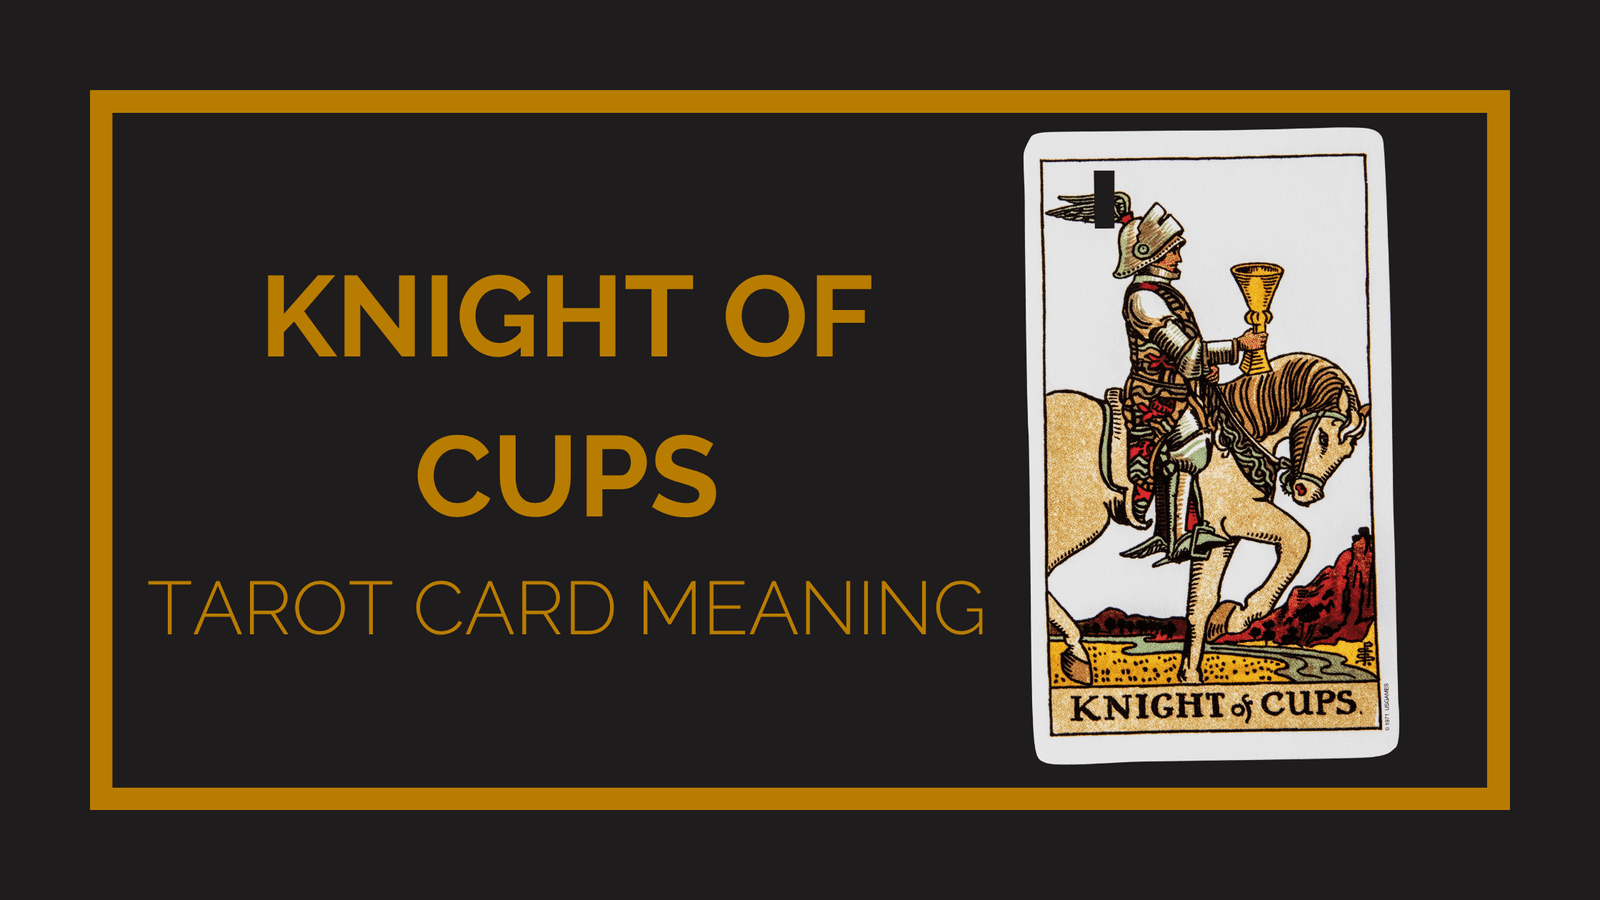 Knight of cups tarot card meaning | tarot with gord